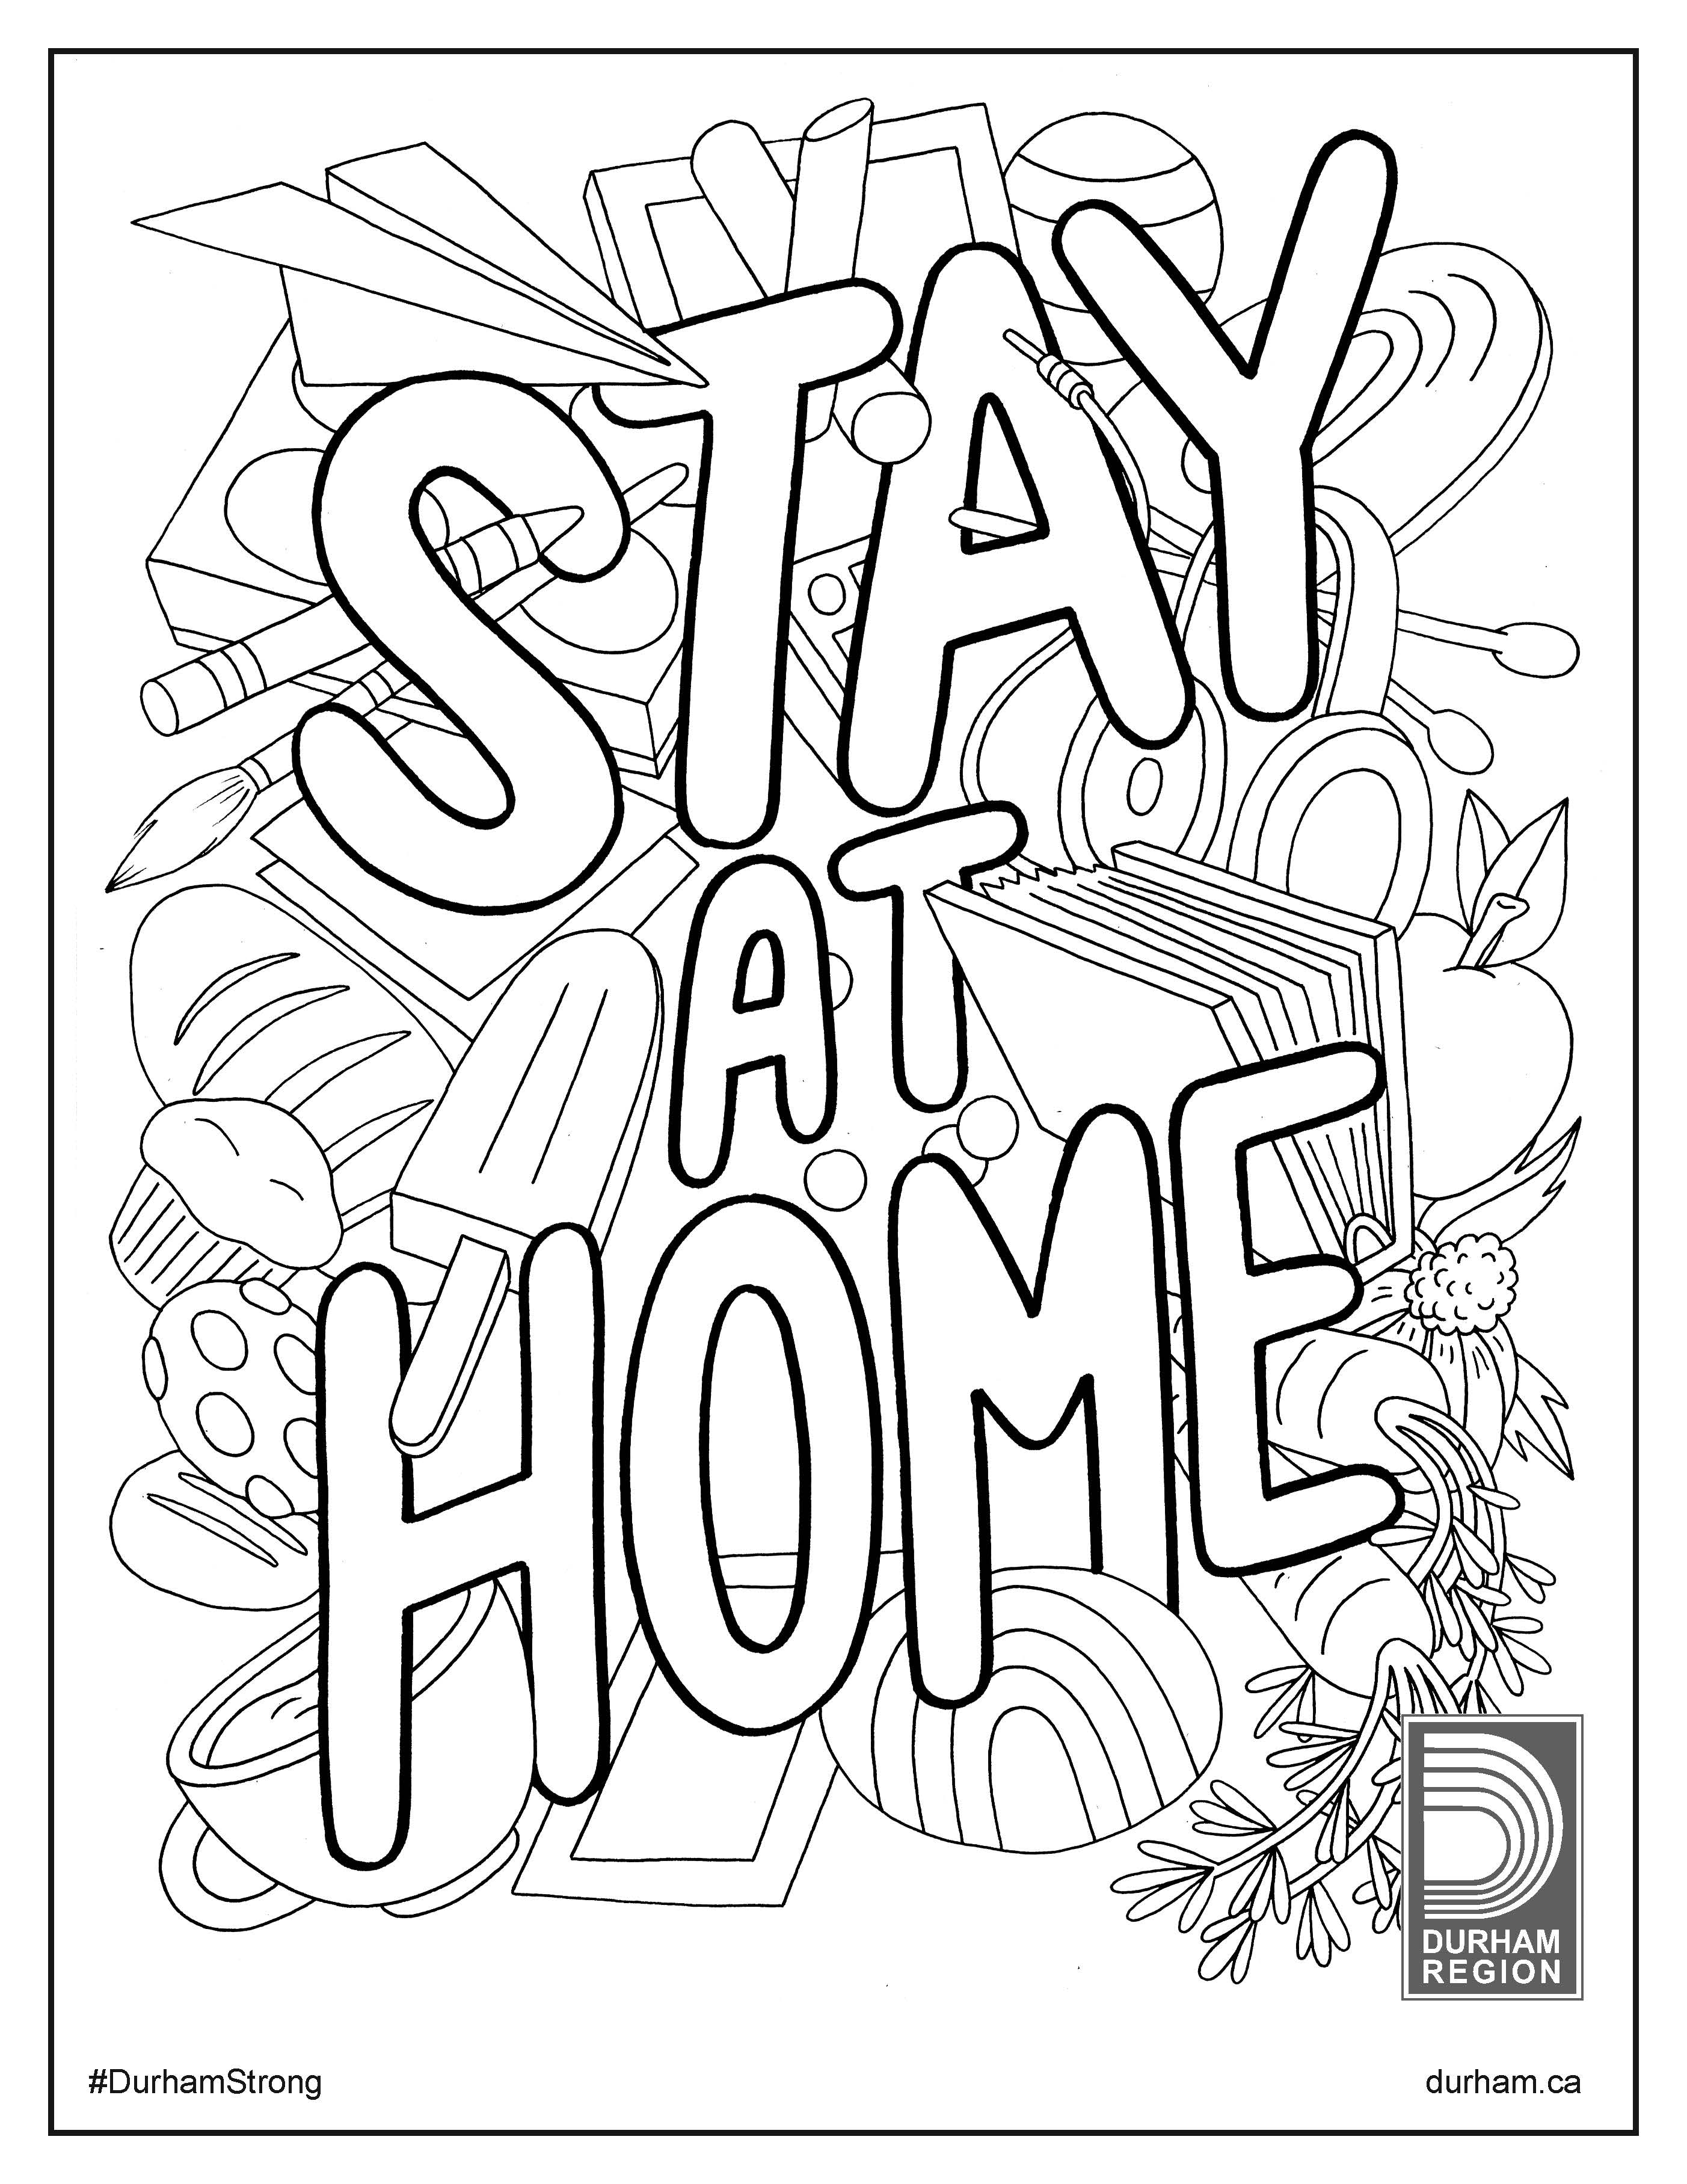 Stay Home colouring page